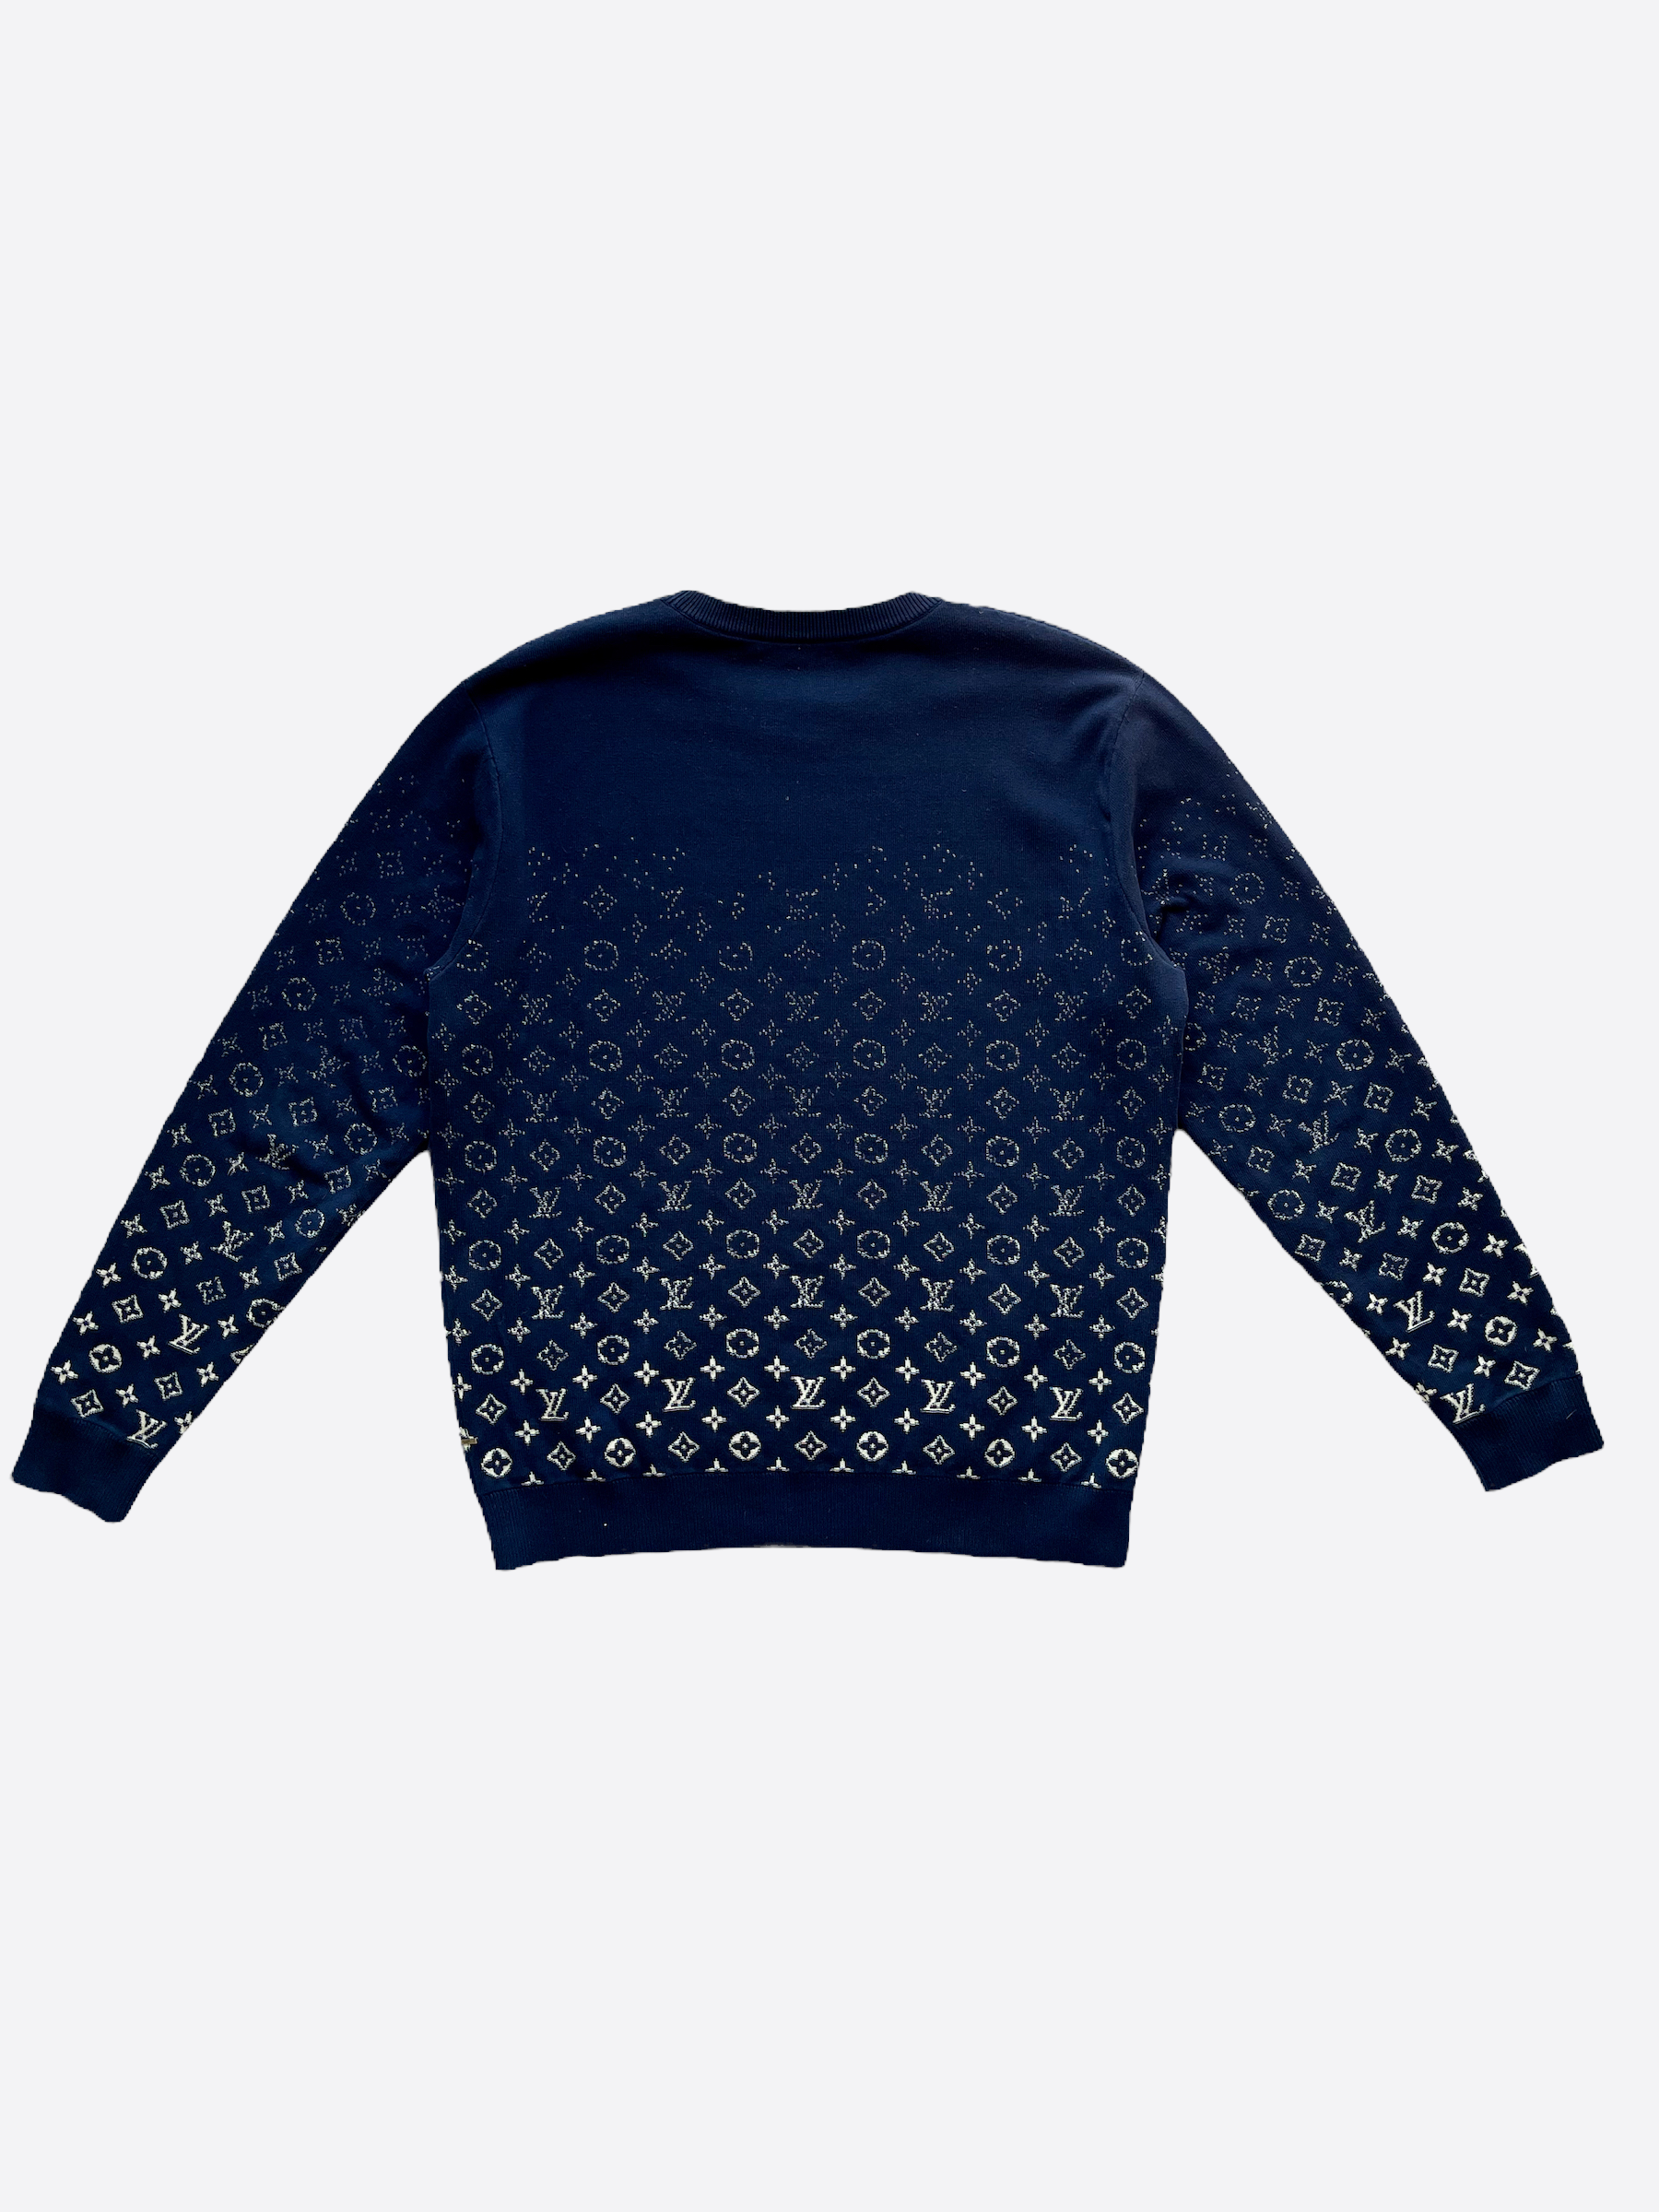 Louis Vuitton Ribbed Accent Sweater Deep Navy. Size S0